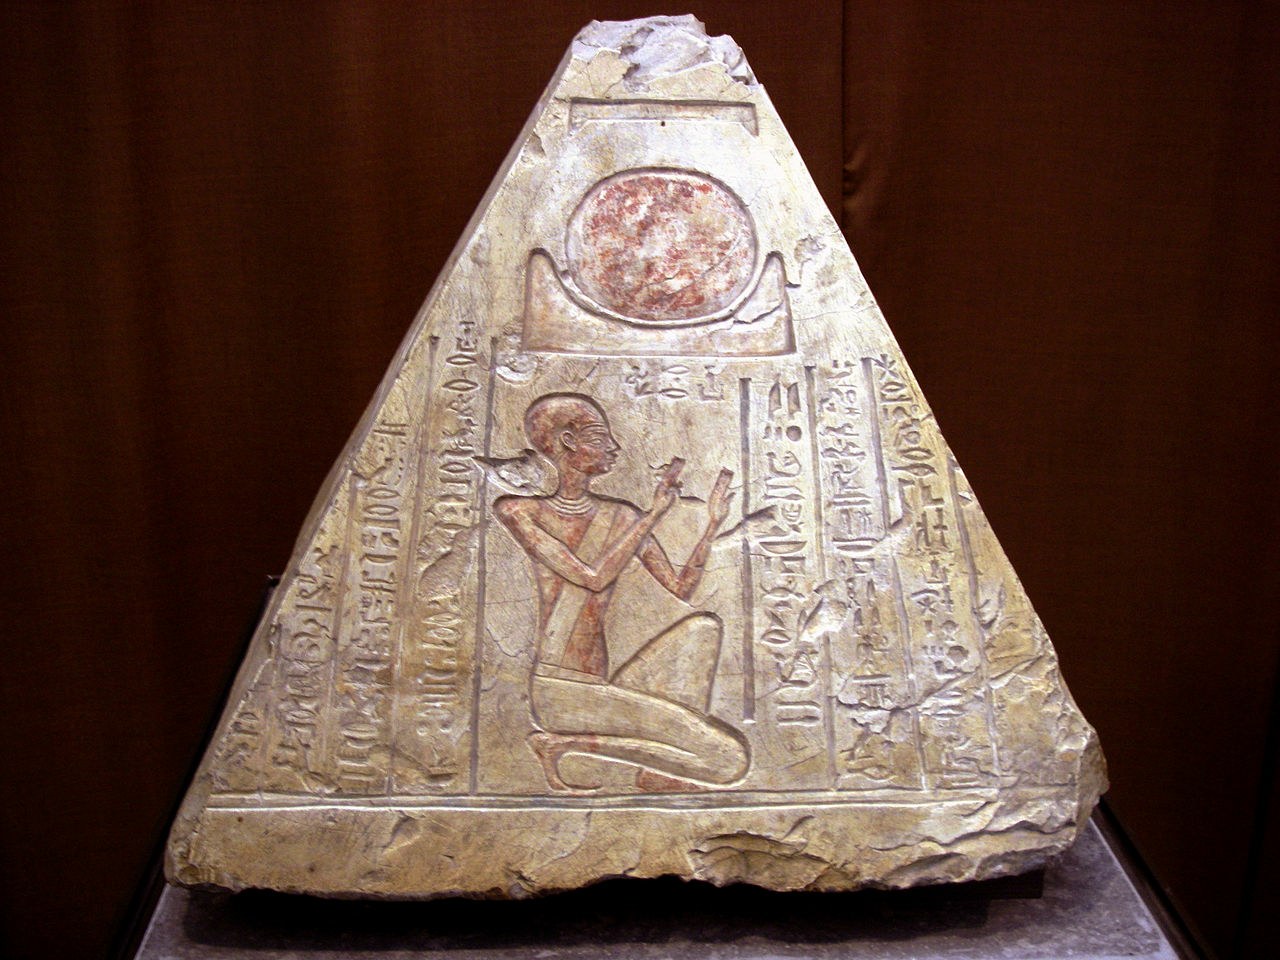 Ancient telegraph: Light signals used for communication in ancient Egypt? 3